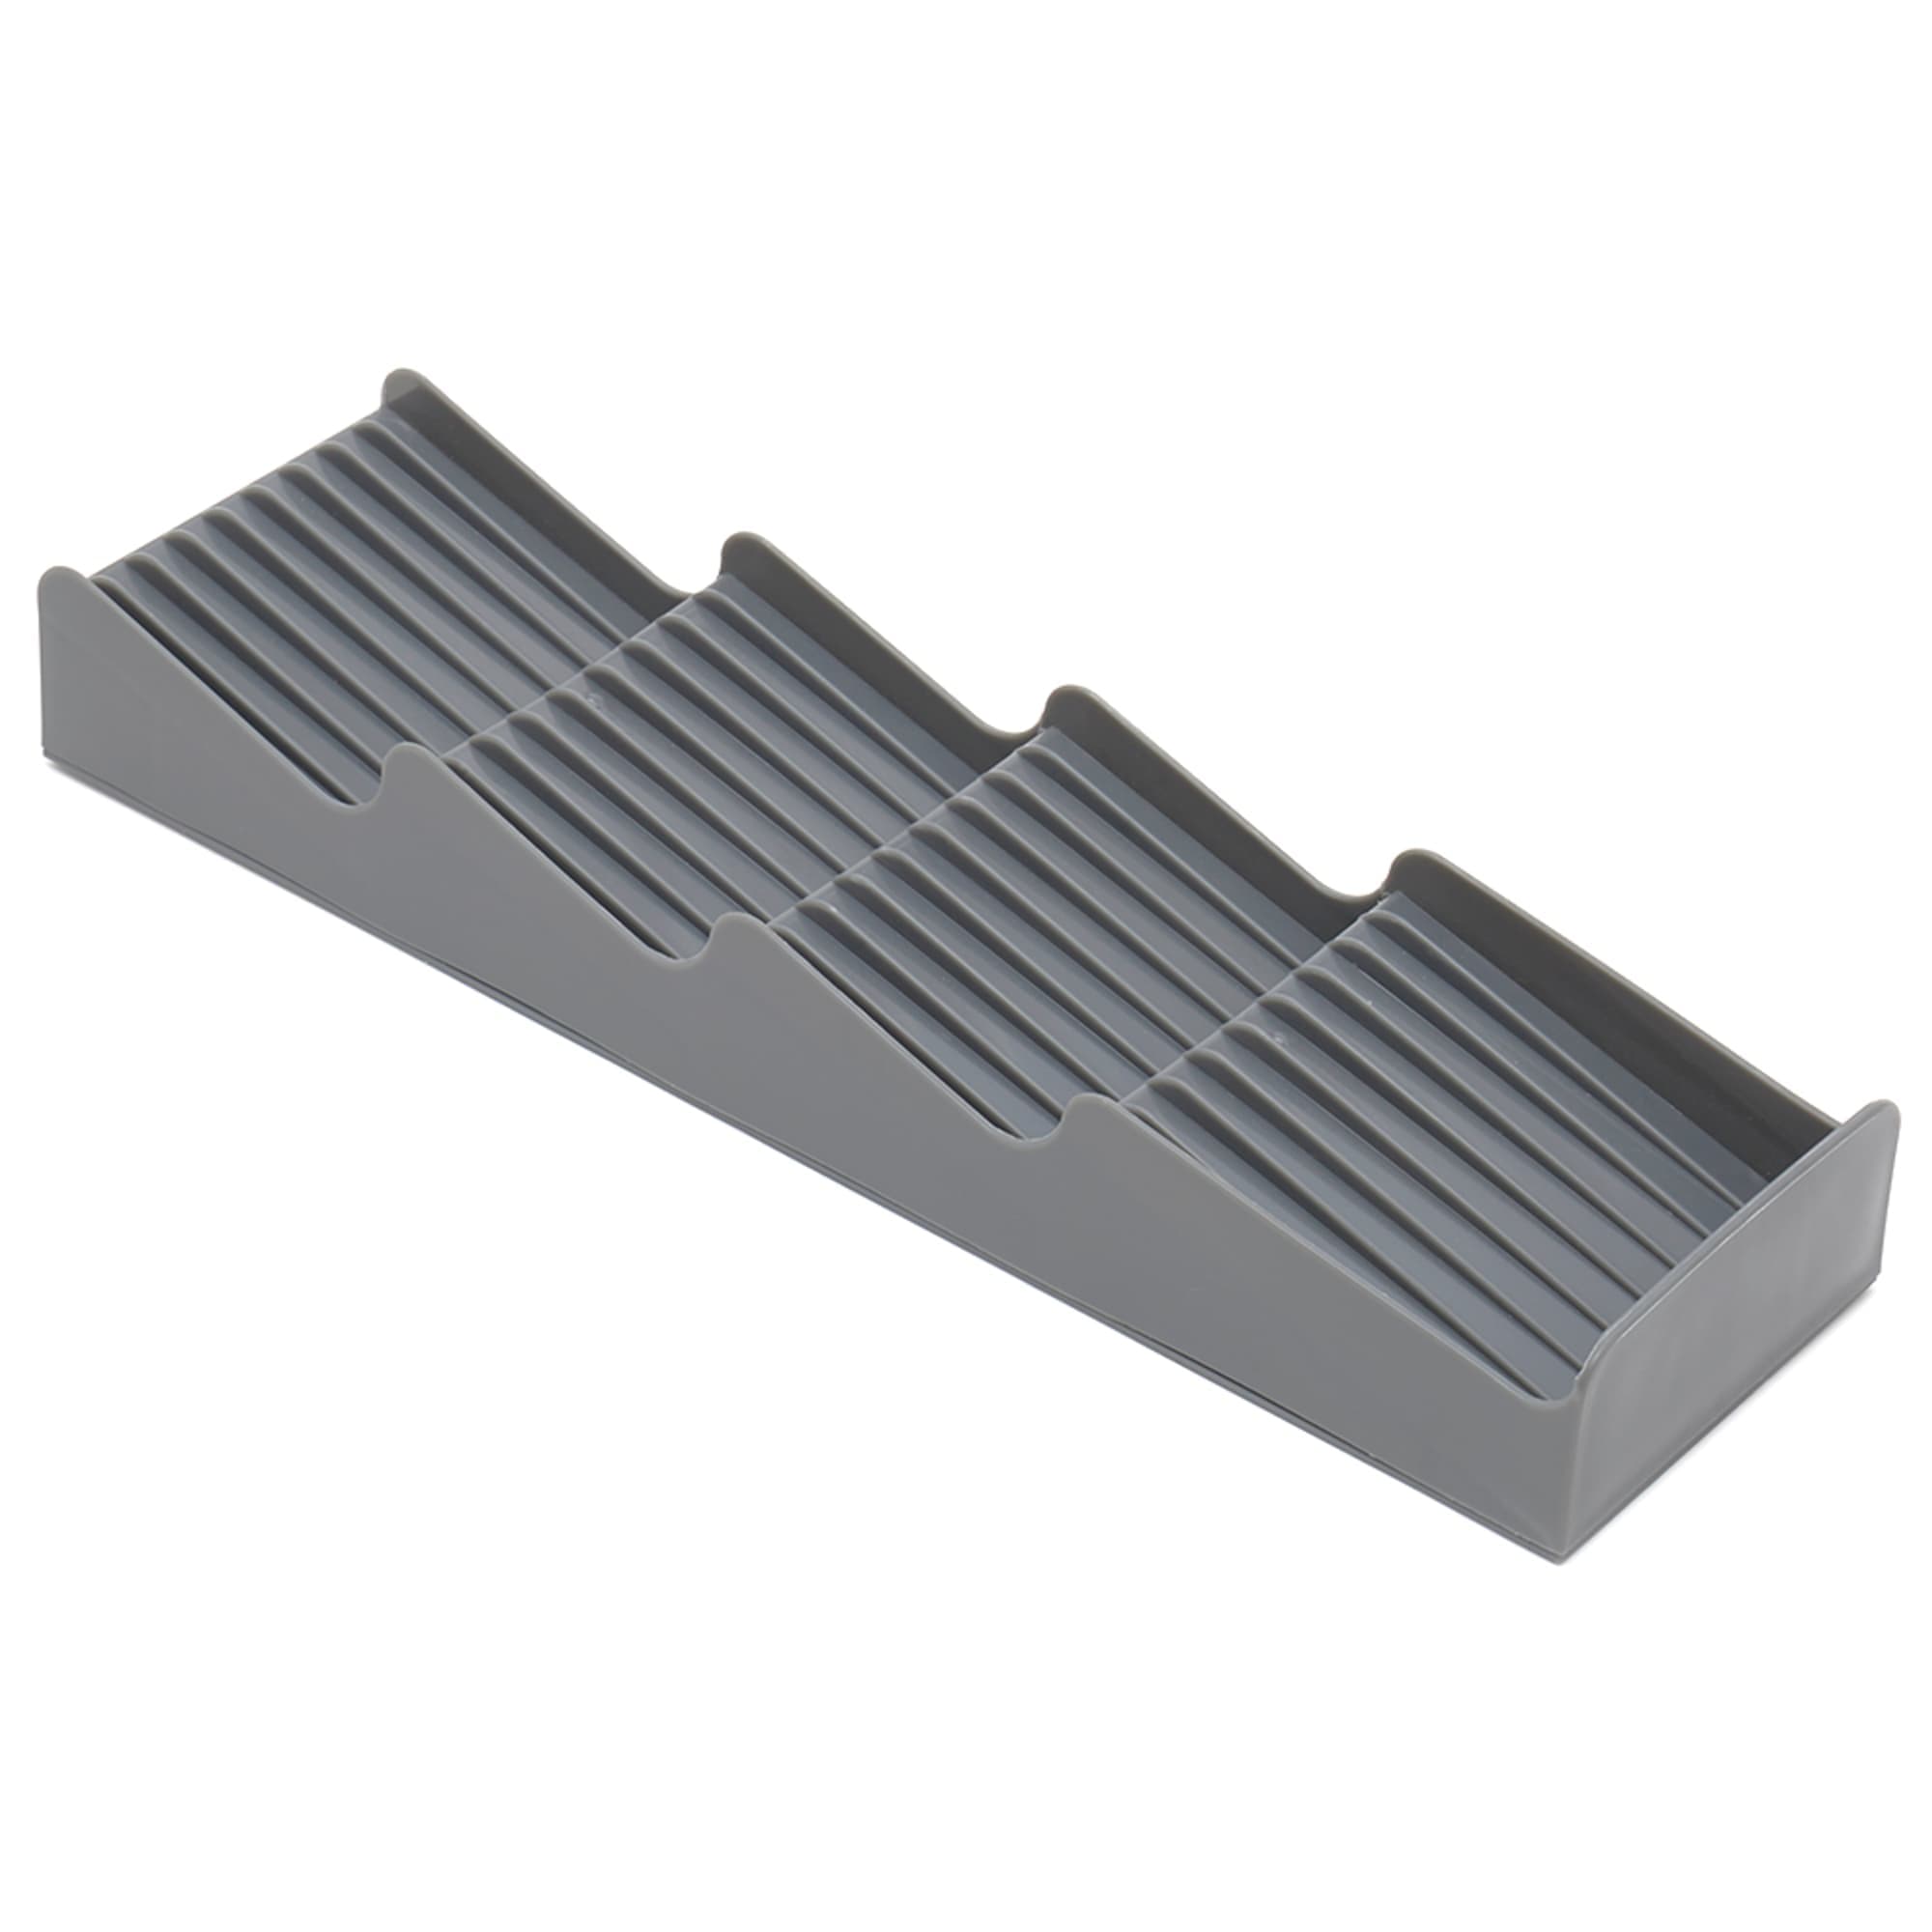 Home Basics Plastic Compact Kitchen Drawer Flatware Organizer, Grey $5.00 EACH, CASE PACK OF 12